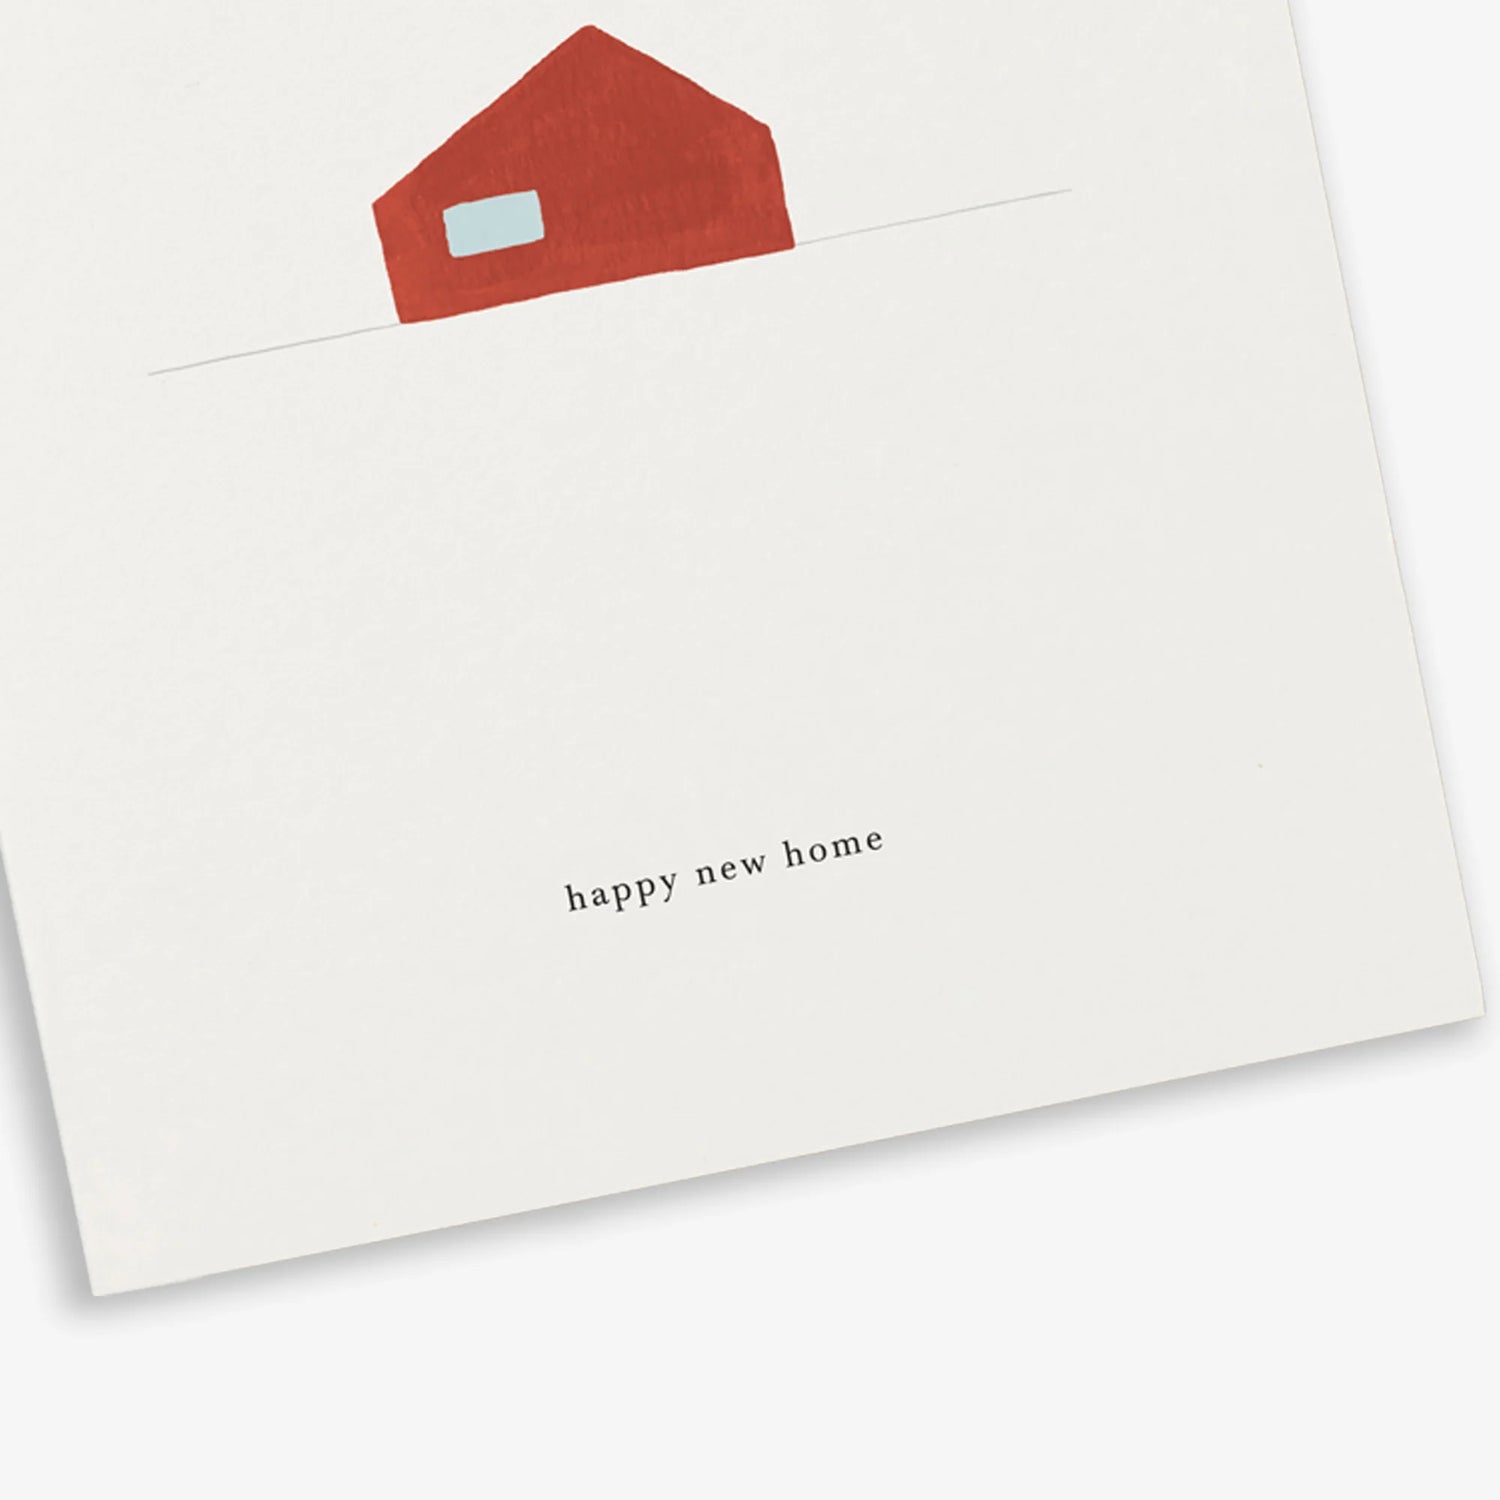 House (happy new home) New home card